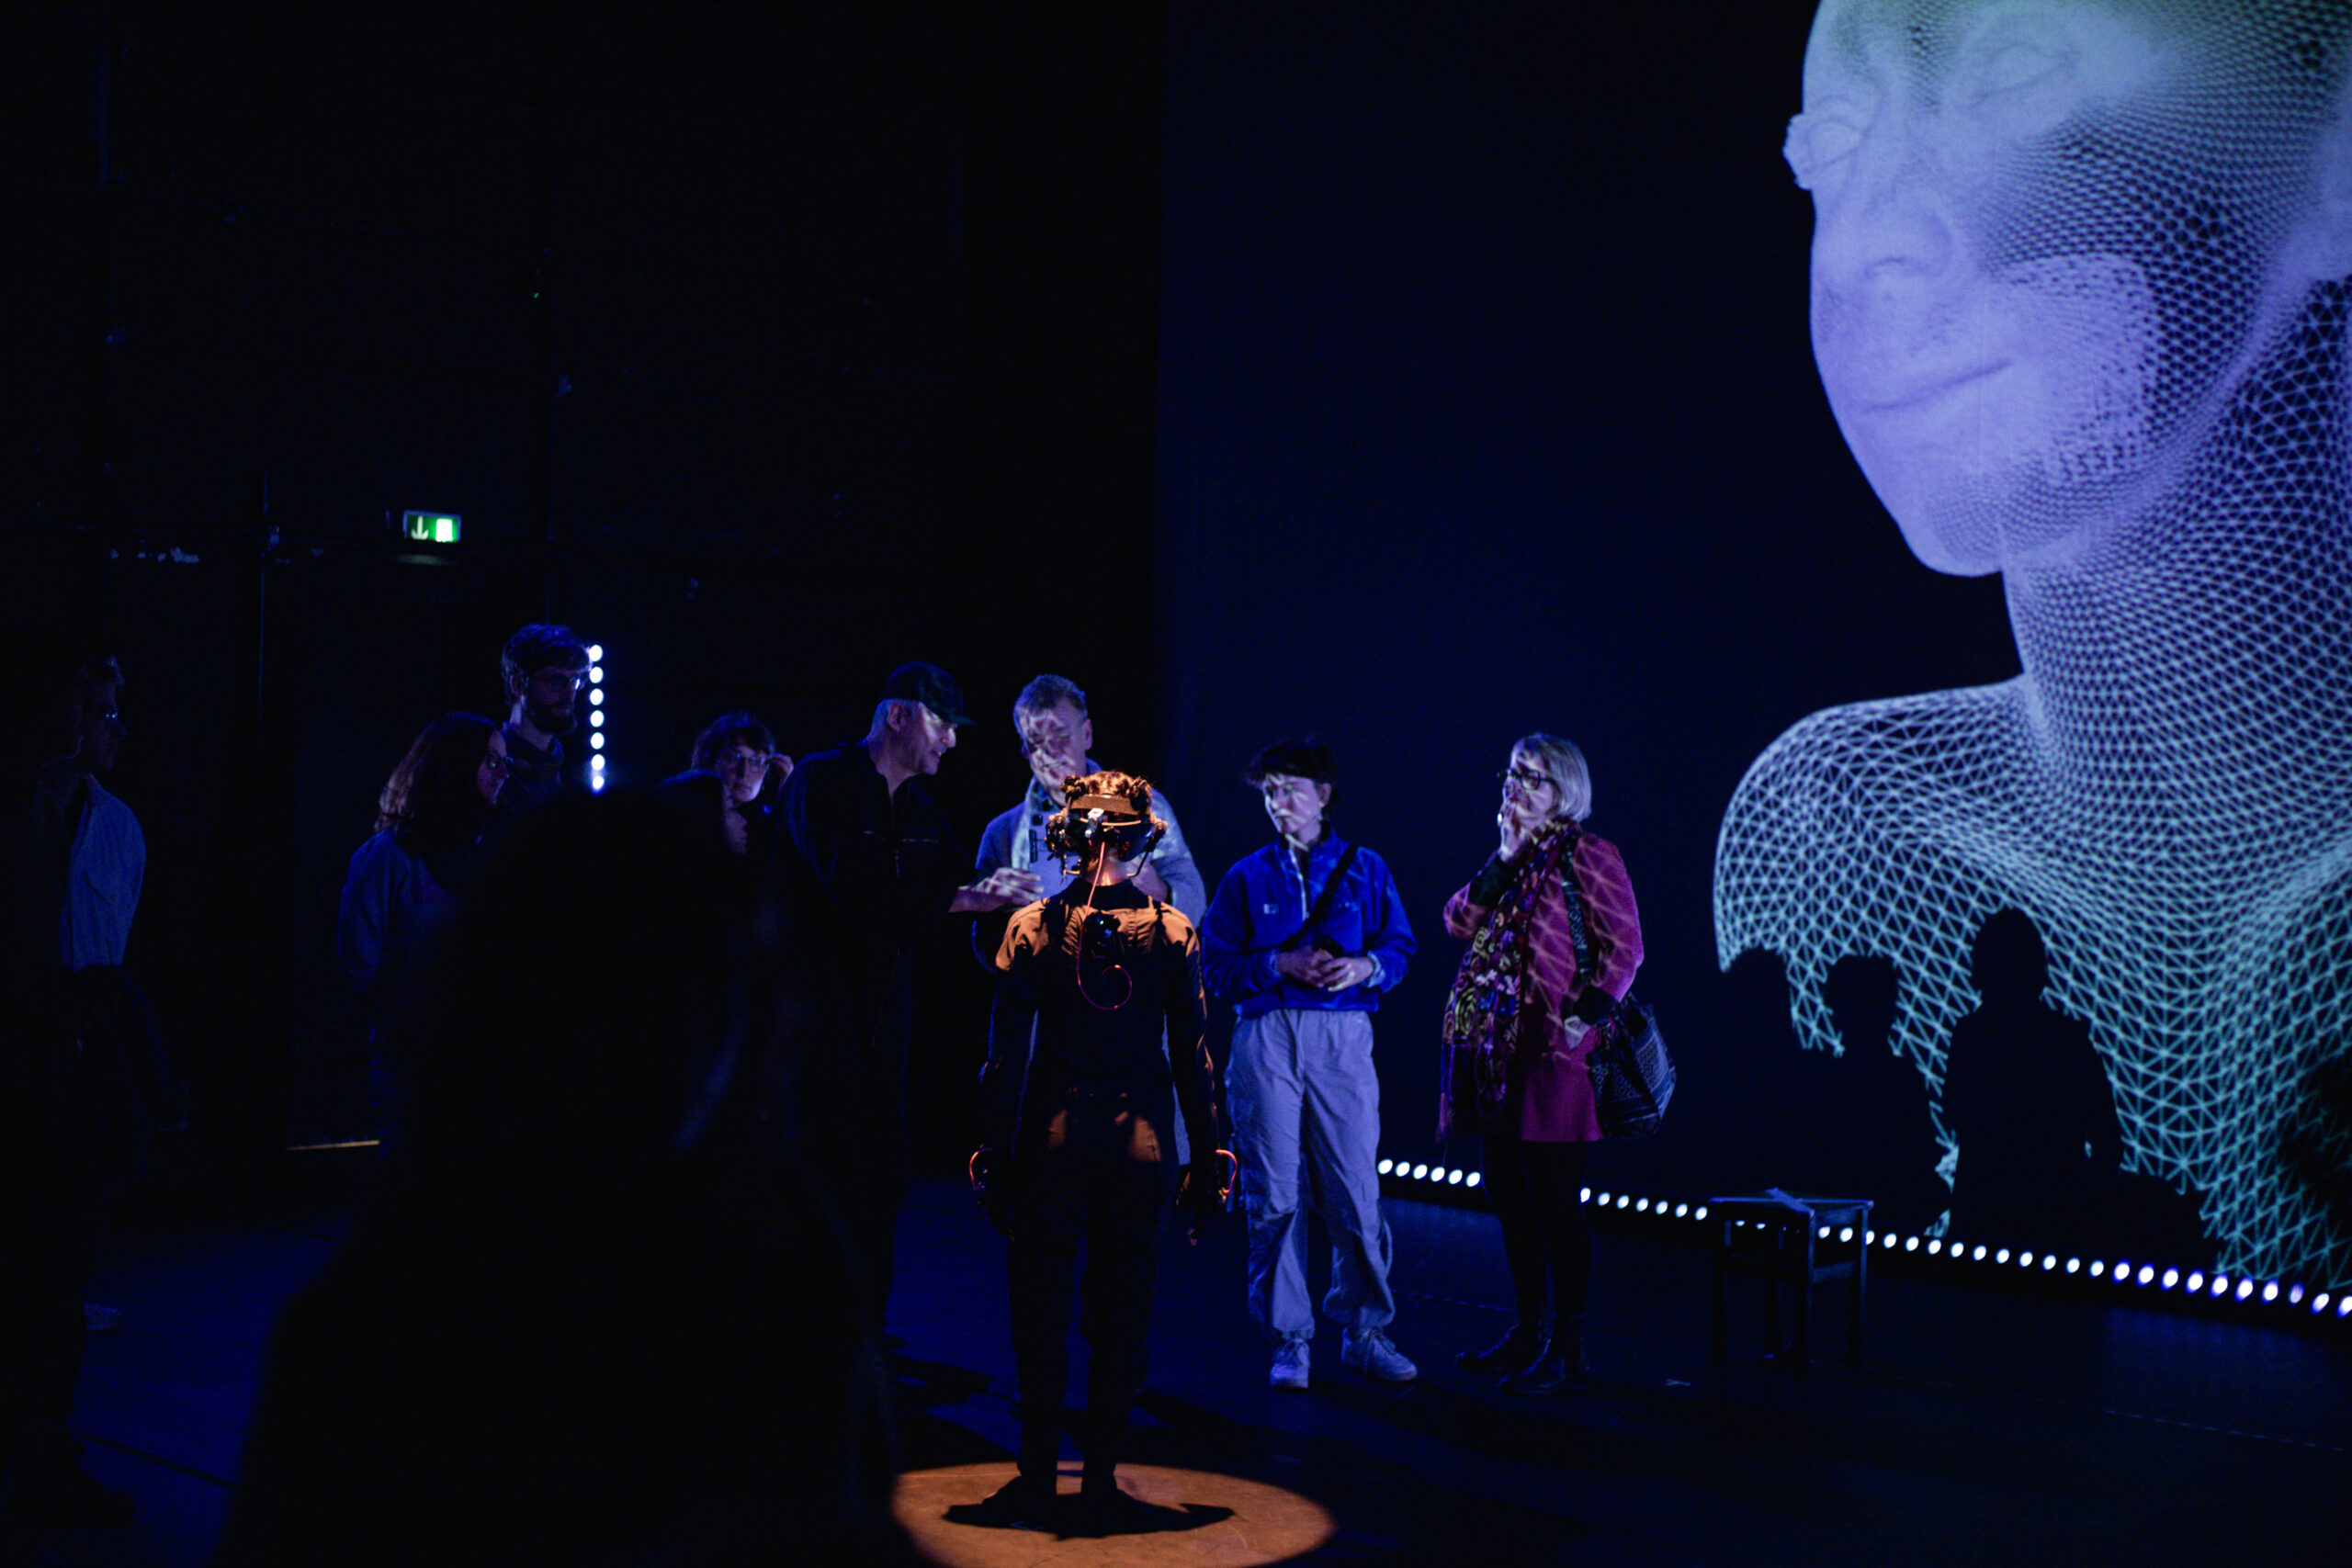 Performer in a motion capture suit with a spotlight surrounded by around 7 people, one explaining to the others. Projection in the background shows a mesh of an avatar